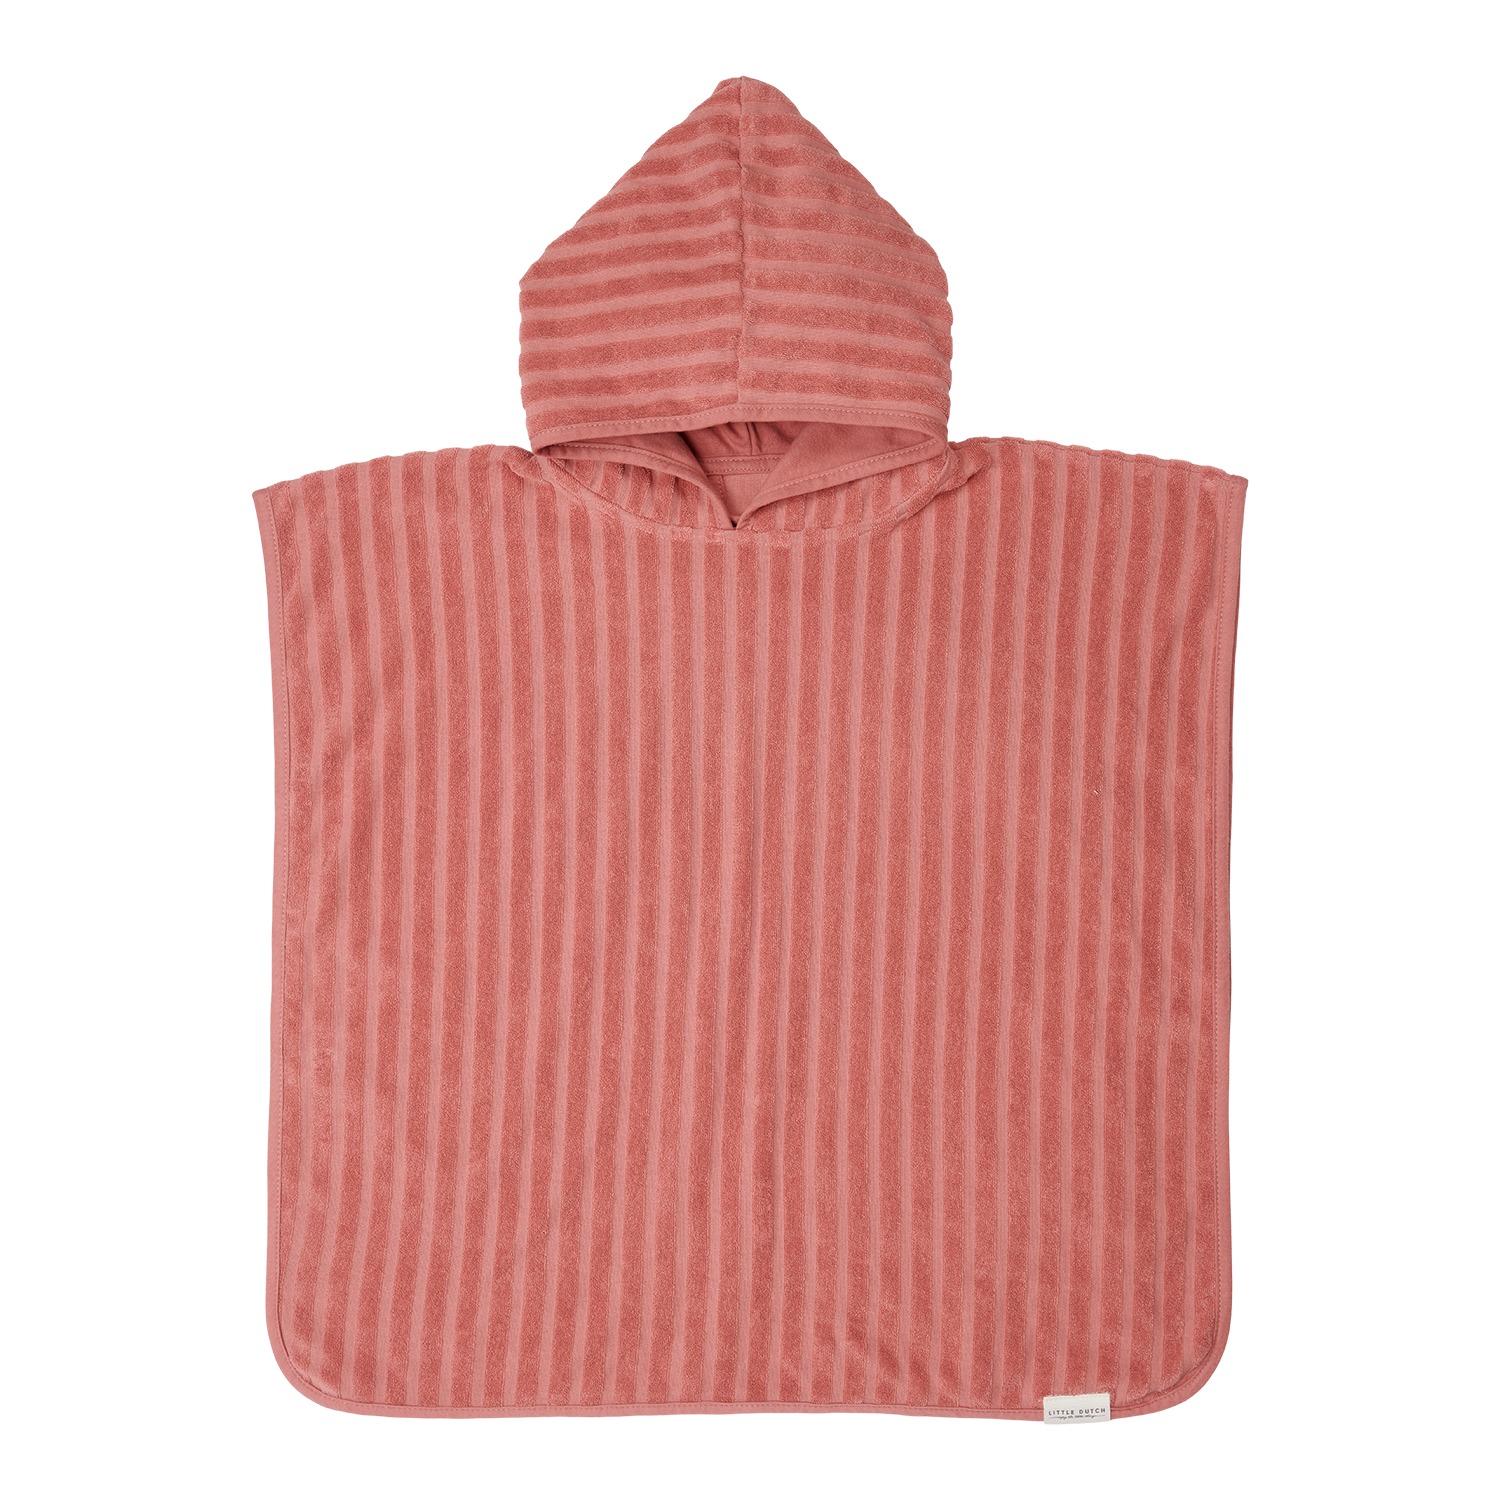 Badeponcho Frottee pink blush